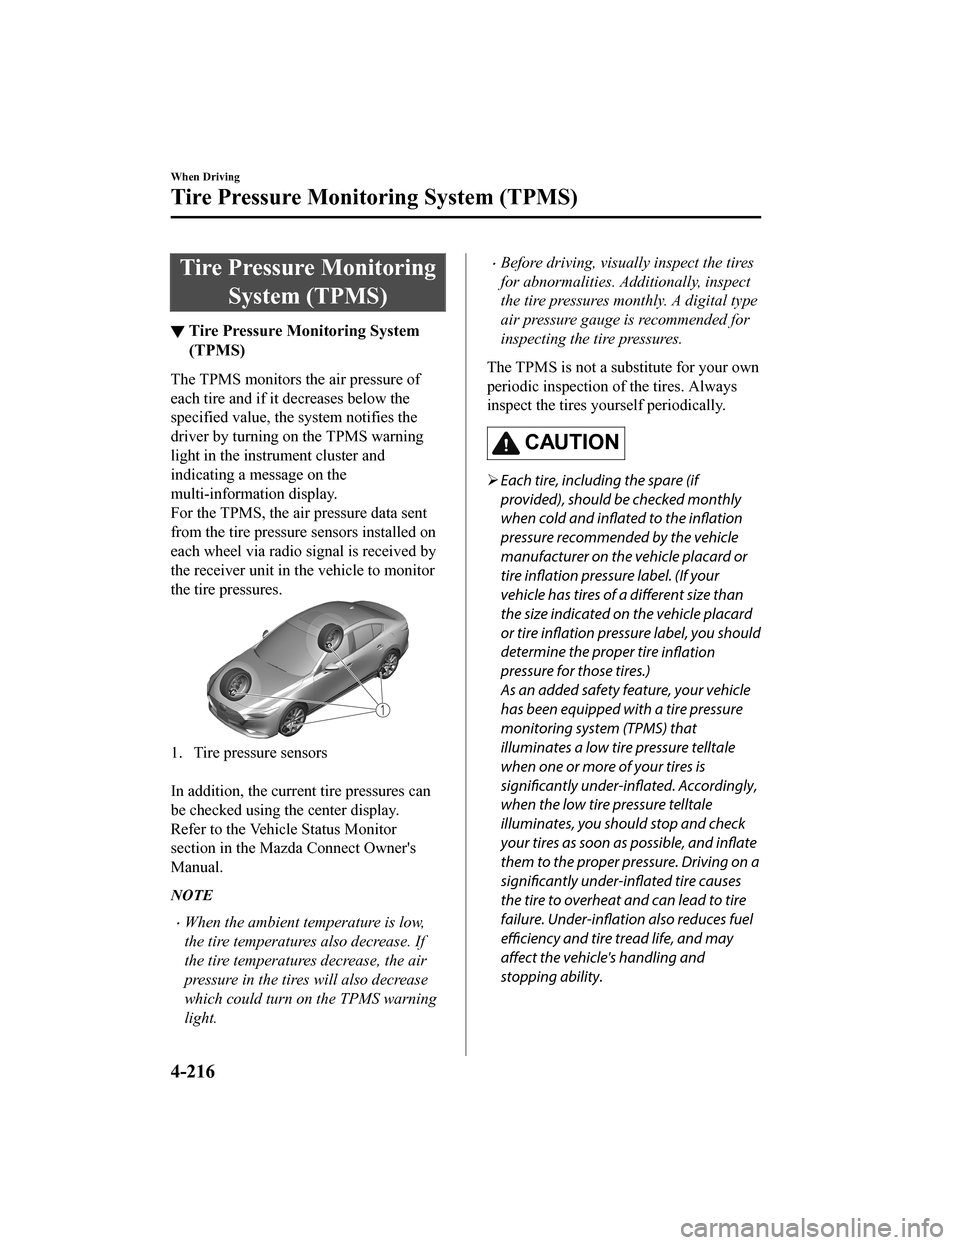 MAZDA MODEL 3 HATCHBACK 2020  Owners Manual (in English) Tire Pressure MonitoringSystem (TPMS)
▼Tire Pressure Monitoring System
(TPMS)
The TPMS monitors the air pressure of
each tire and if it decreases below the
specified value, the system notifies the
d